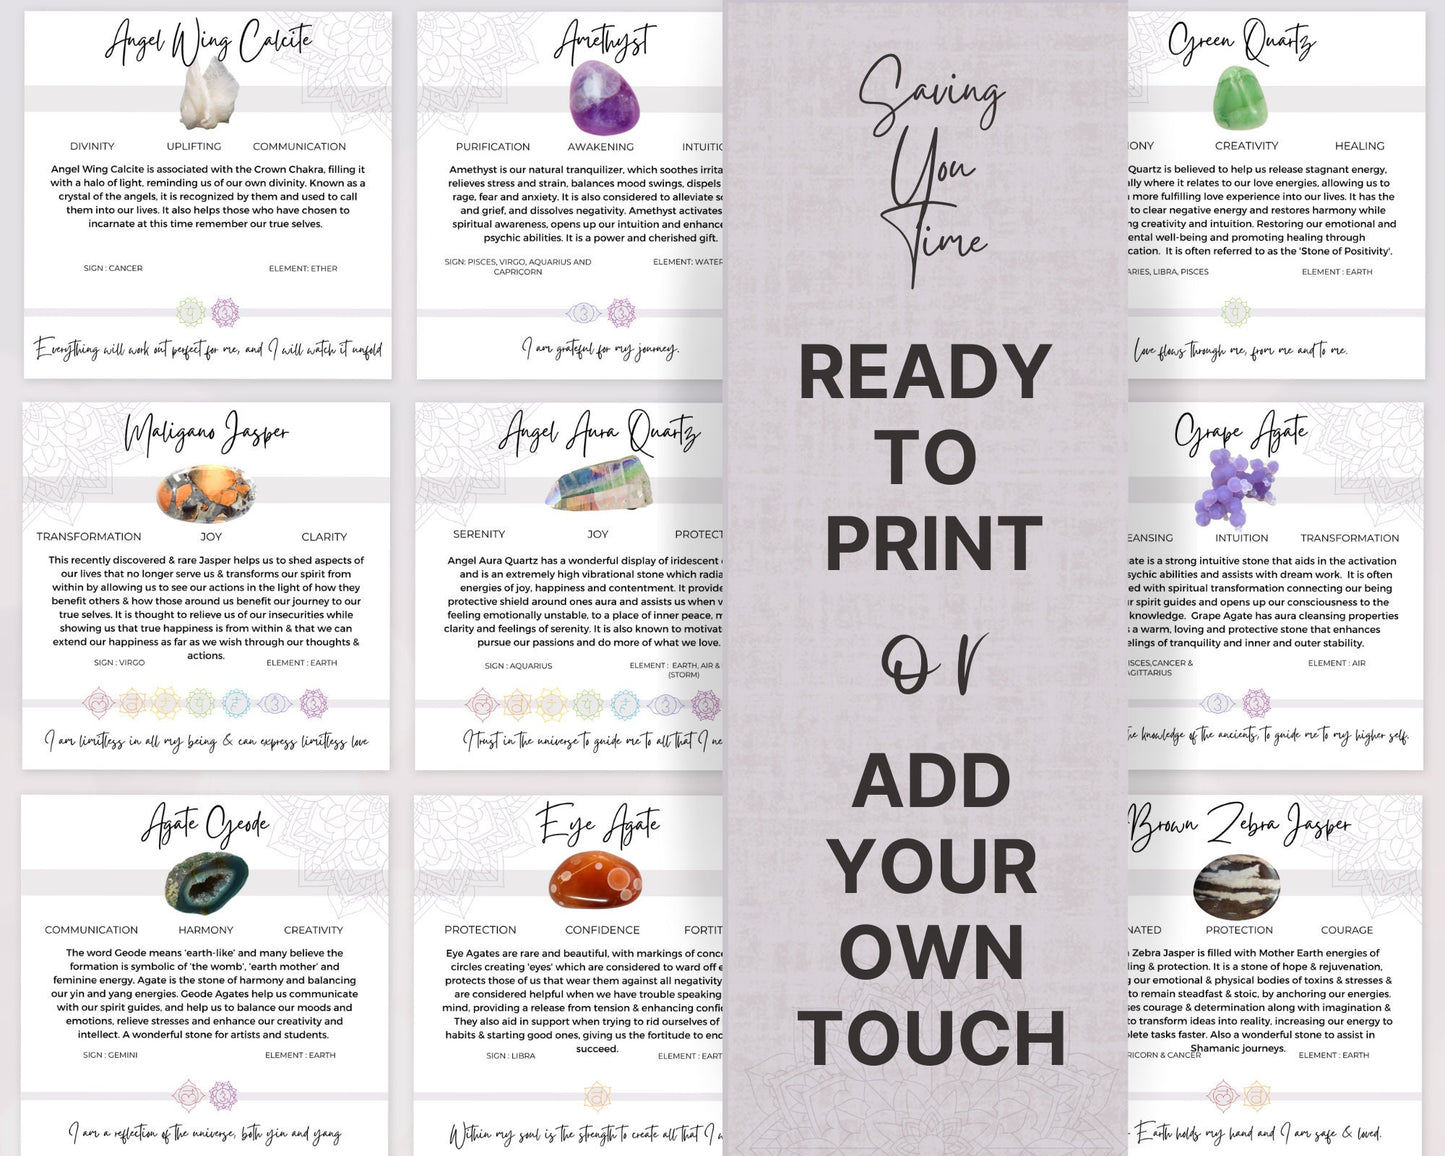 400 Digital Crystal Cards, Editable Gemstone Meaning Cards, Healing Stones & Chakra Crystals Properties, Crystal Shop Packaging Insert Cards